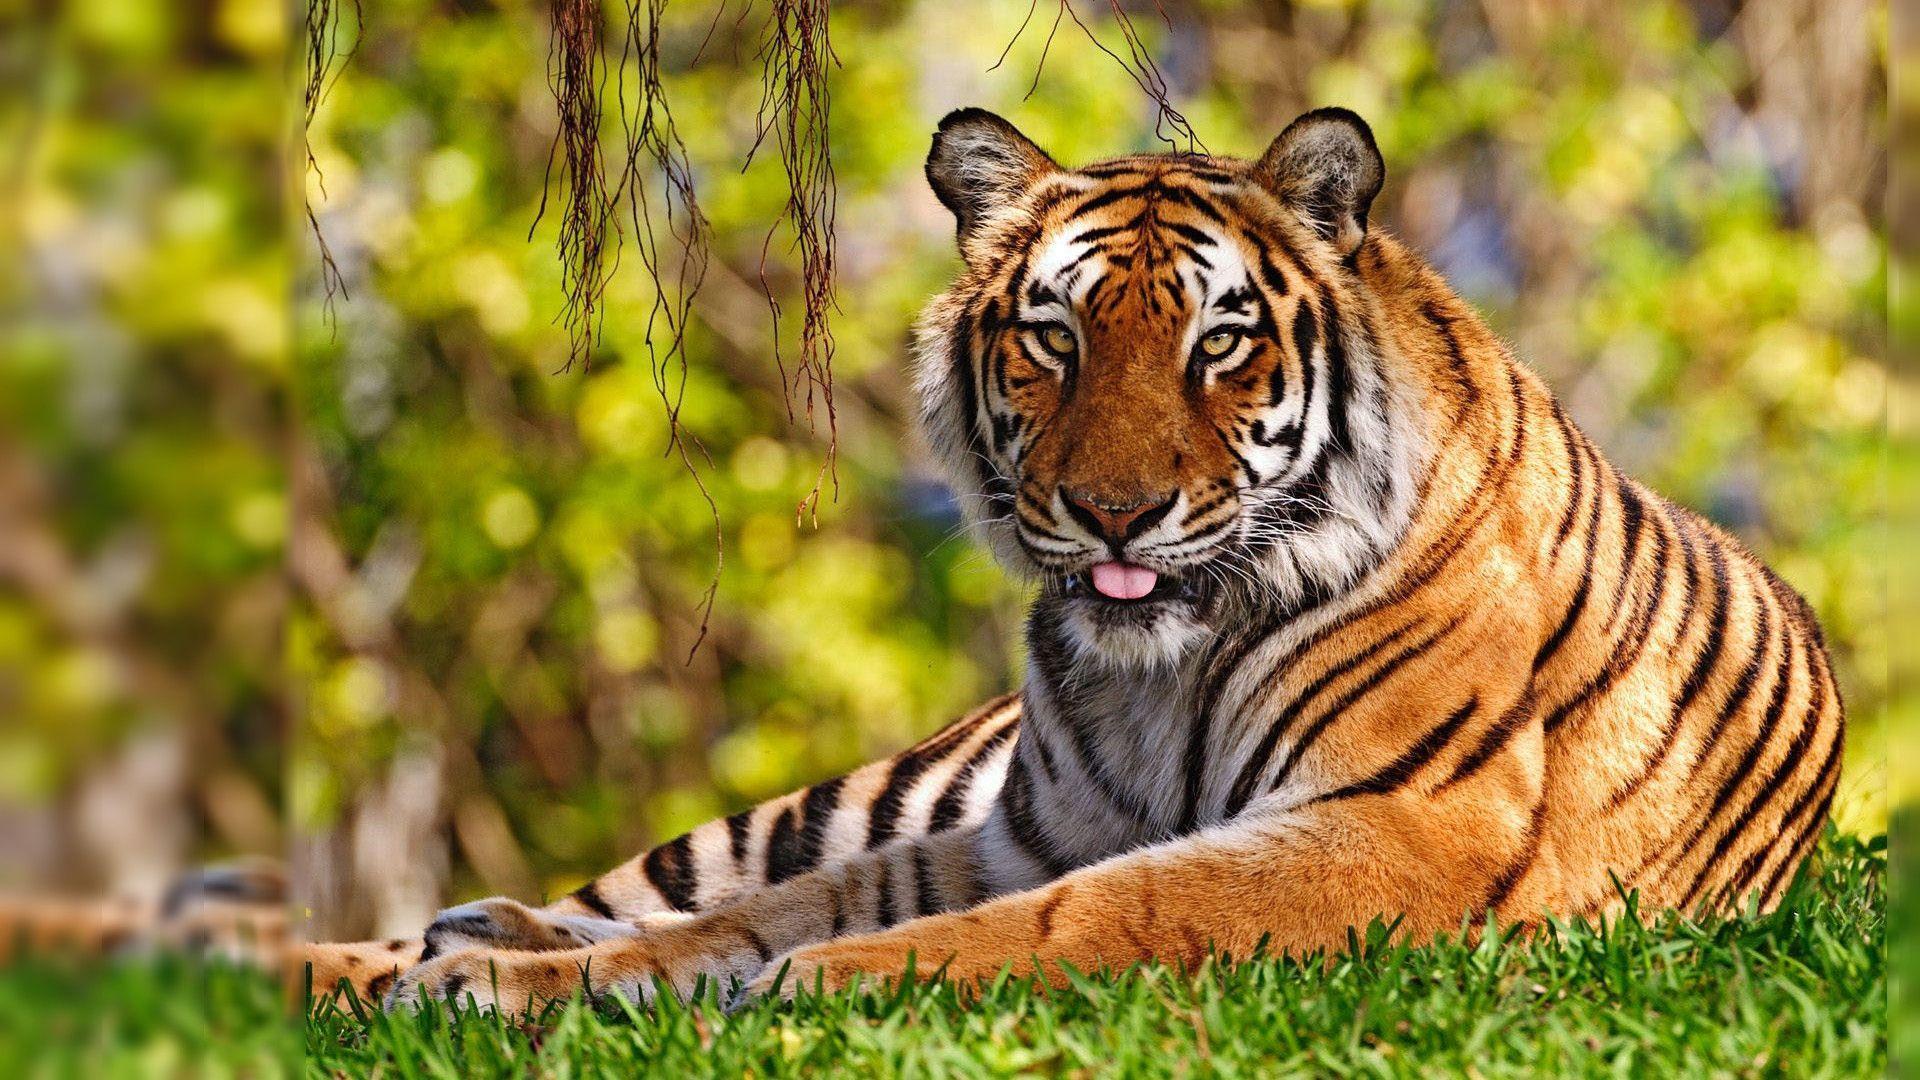 Download free Tiger Wallpapers Amazing collection of full screen Tiger HD  Wallpapers at 2880x1800 1920  Wild animal wallpaper Tiger wallpaper  Animal wallpaper